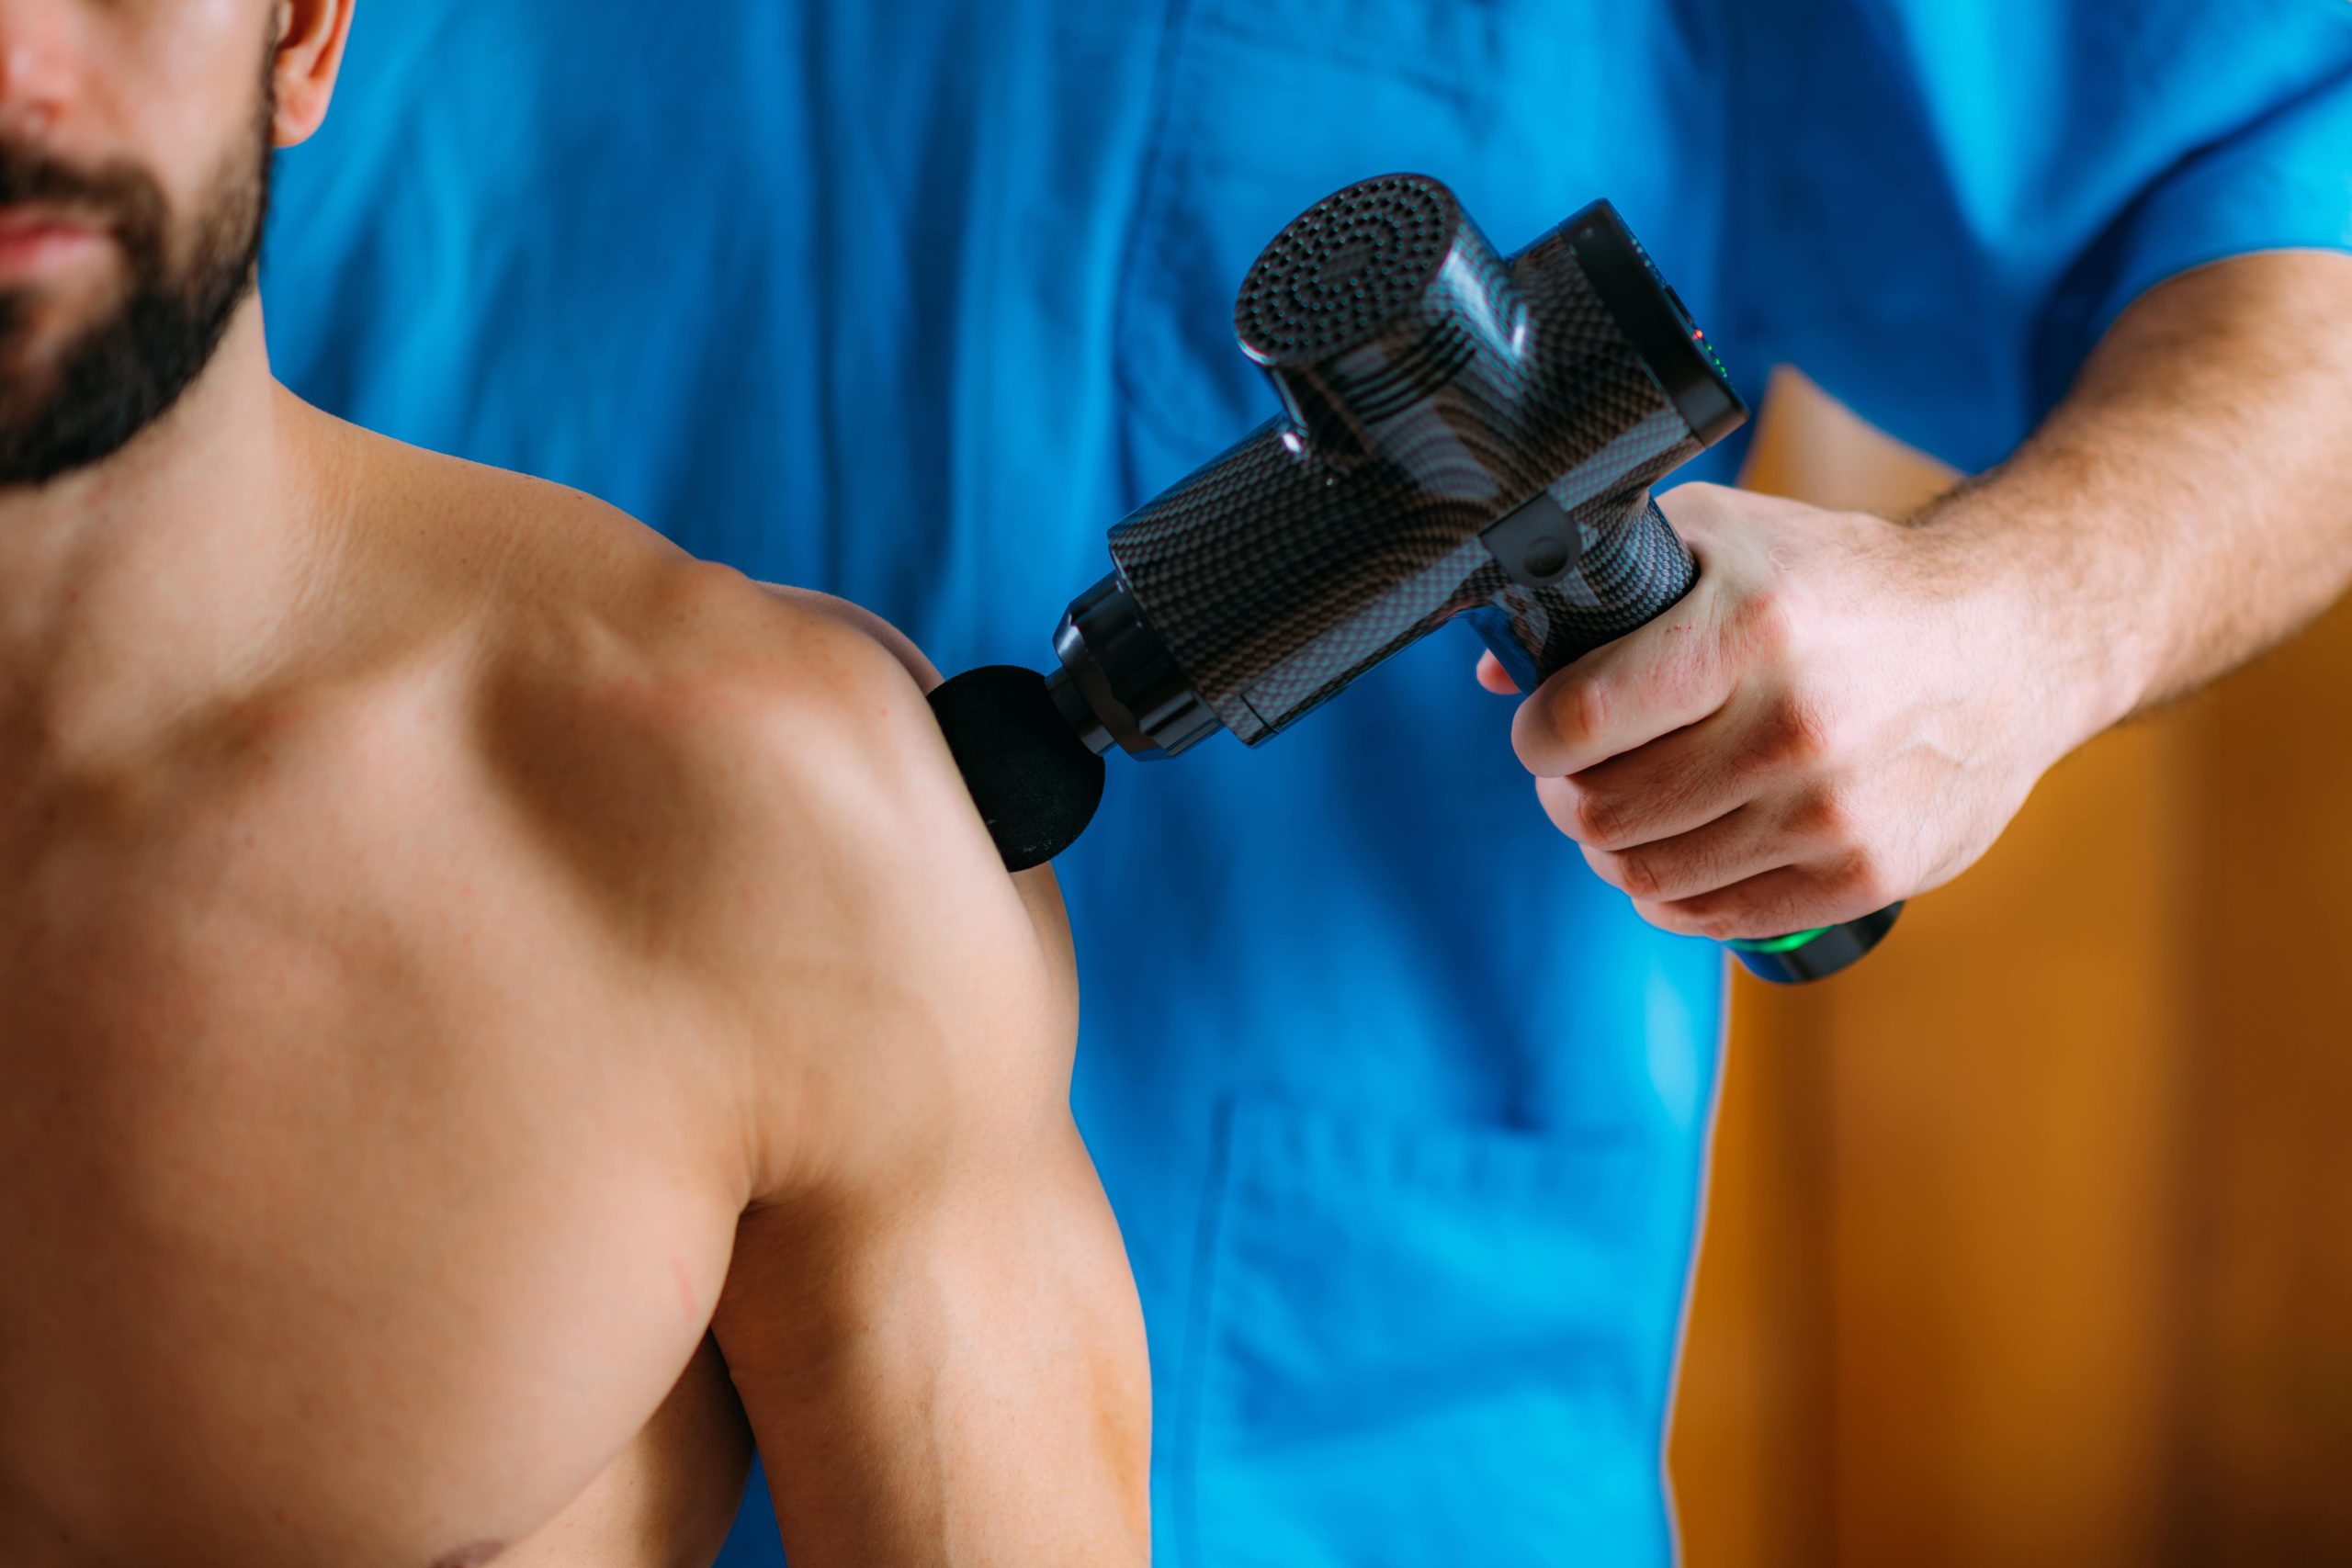 The Ultimate Guide to Using a Massage Gun for Optimal Results